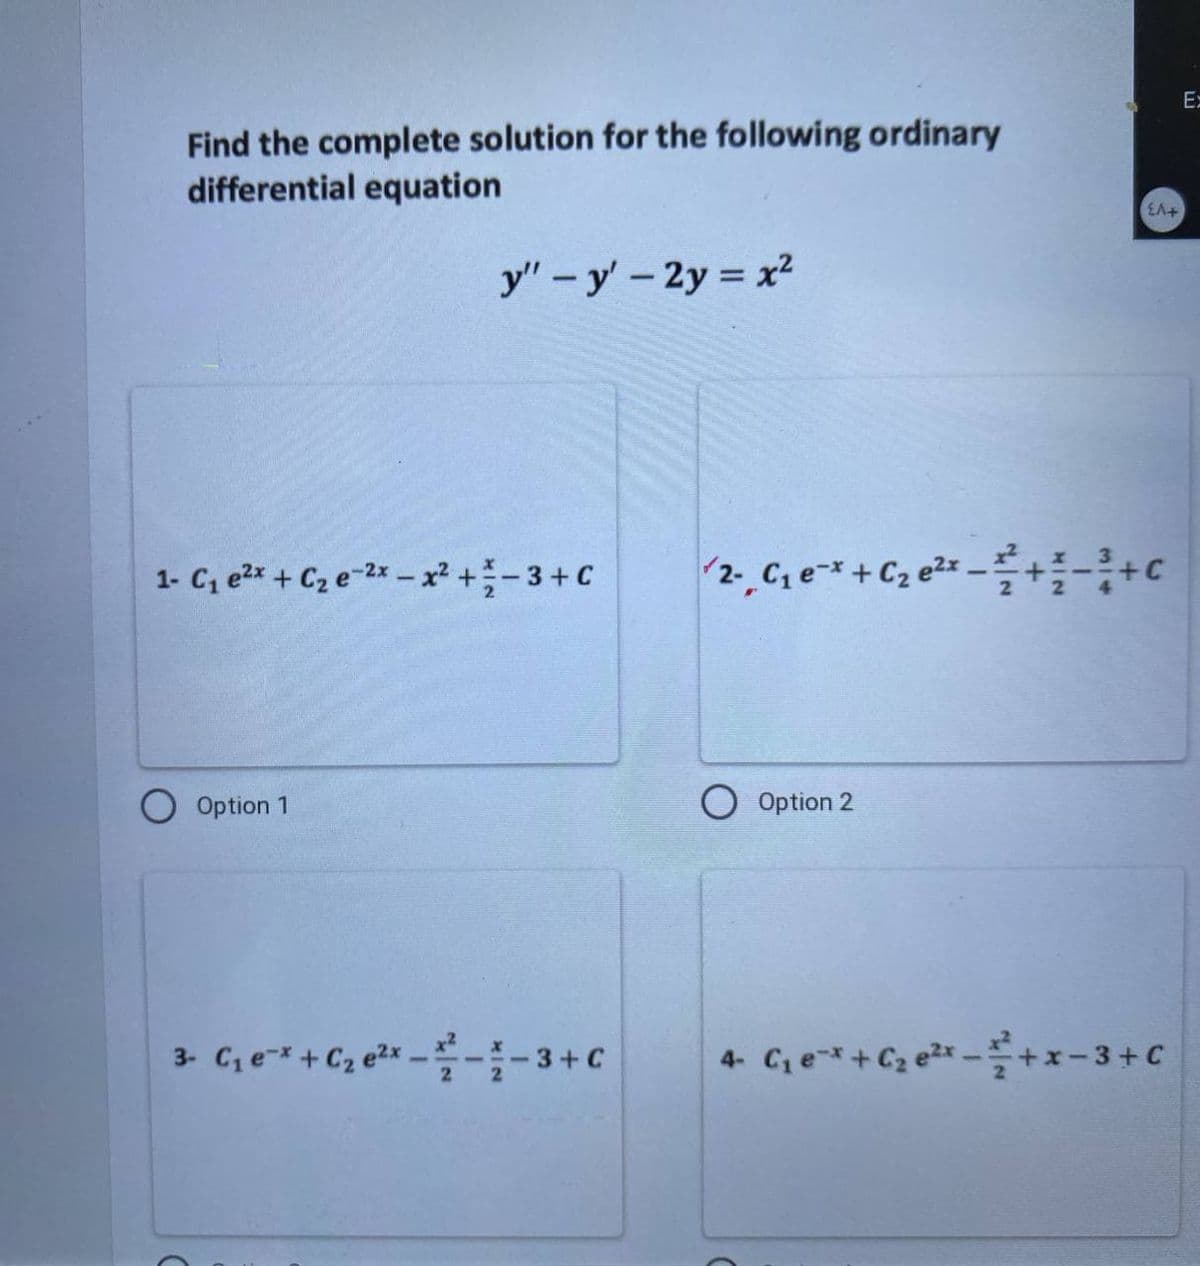 Find the complete solution for the following ordinary
differential equation
y" - y' - 2y = x²
1- C₁₂ e²x + C₂e-2x-x² + 3 + C
Option 1
3- C₁ e* + C₂ e²x ---3+C
EA+
2- C₁ e-x + C₂ e²x -+-+c
Option 2
4- C₁ e* + C₂ ²x+x−3+ C
Ex